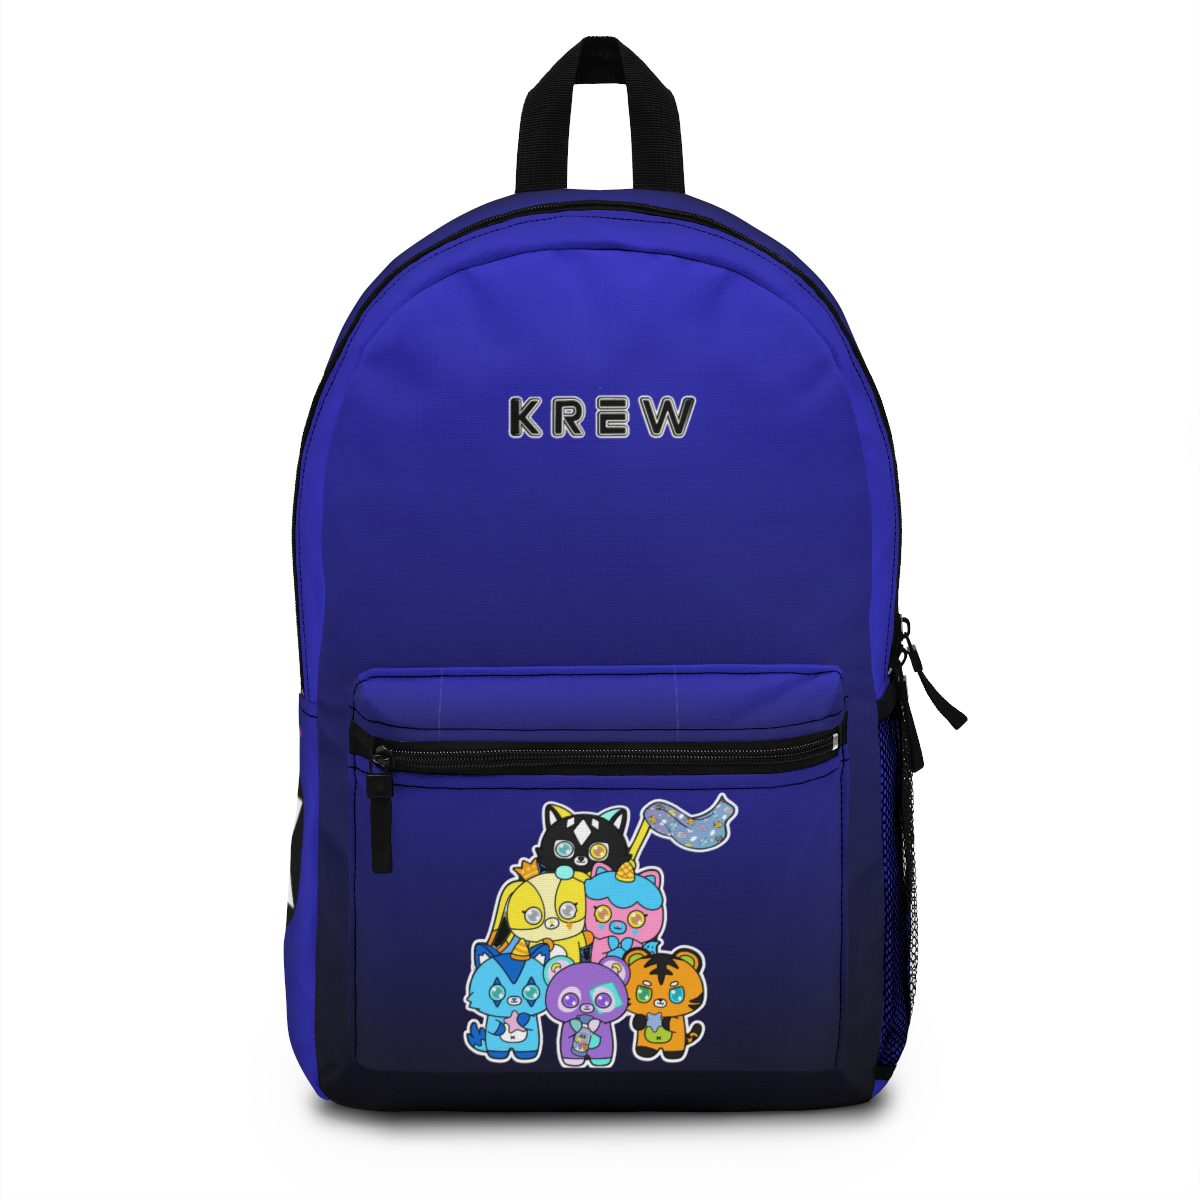 Medium Blue Backpack Krew District TV Show with KREWBIES on Pocket Cool Kiddo 10